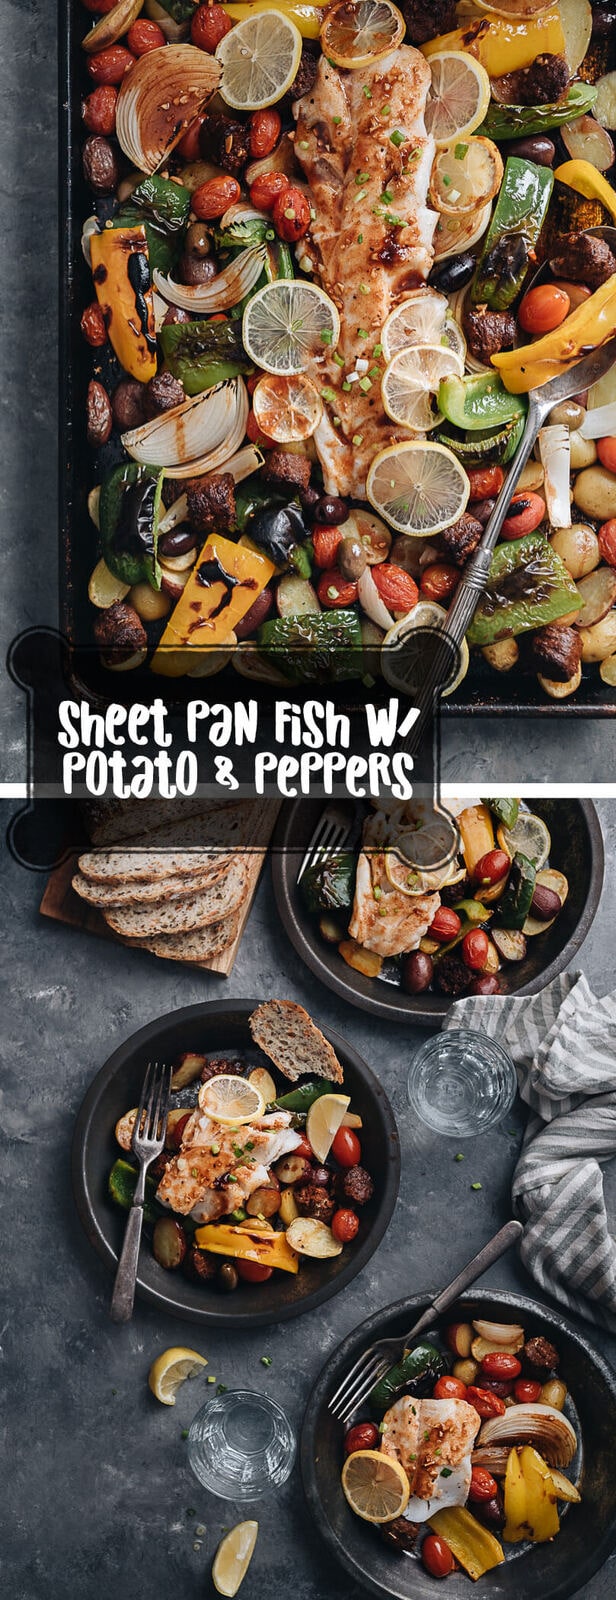 A super delicious and healthy sheet pan dinner that can be done in 30 minutes.